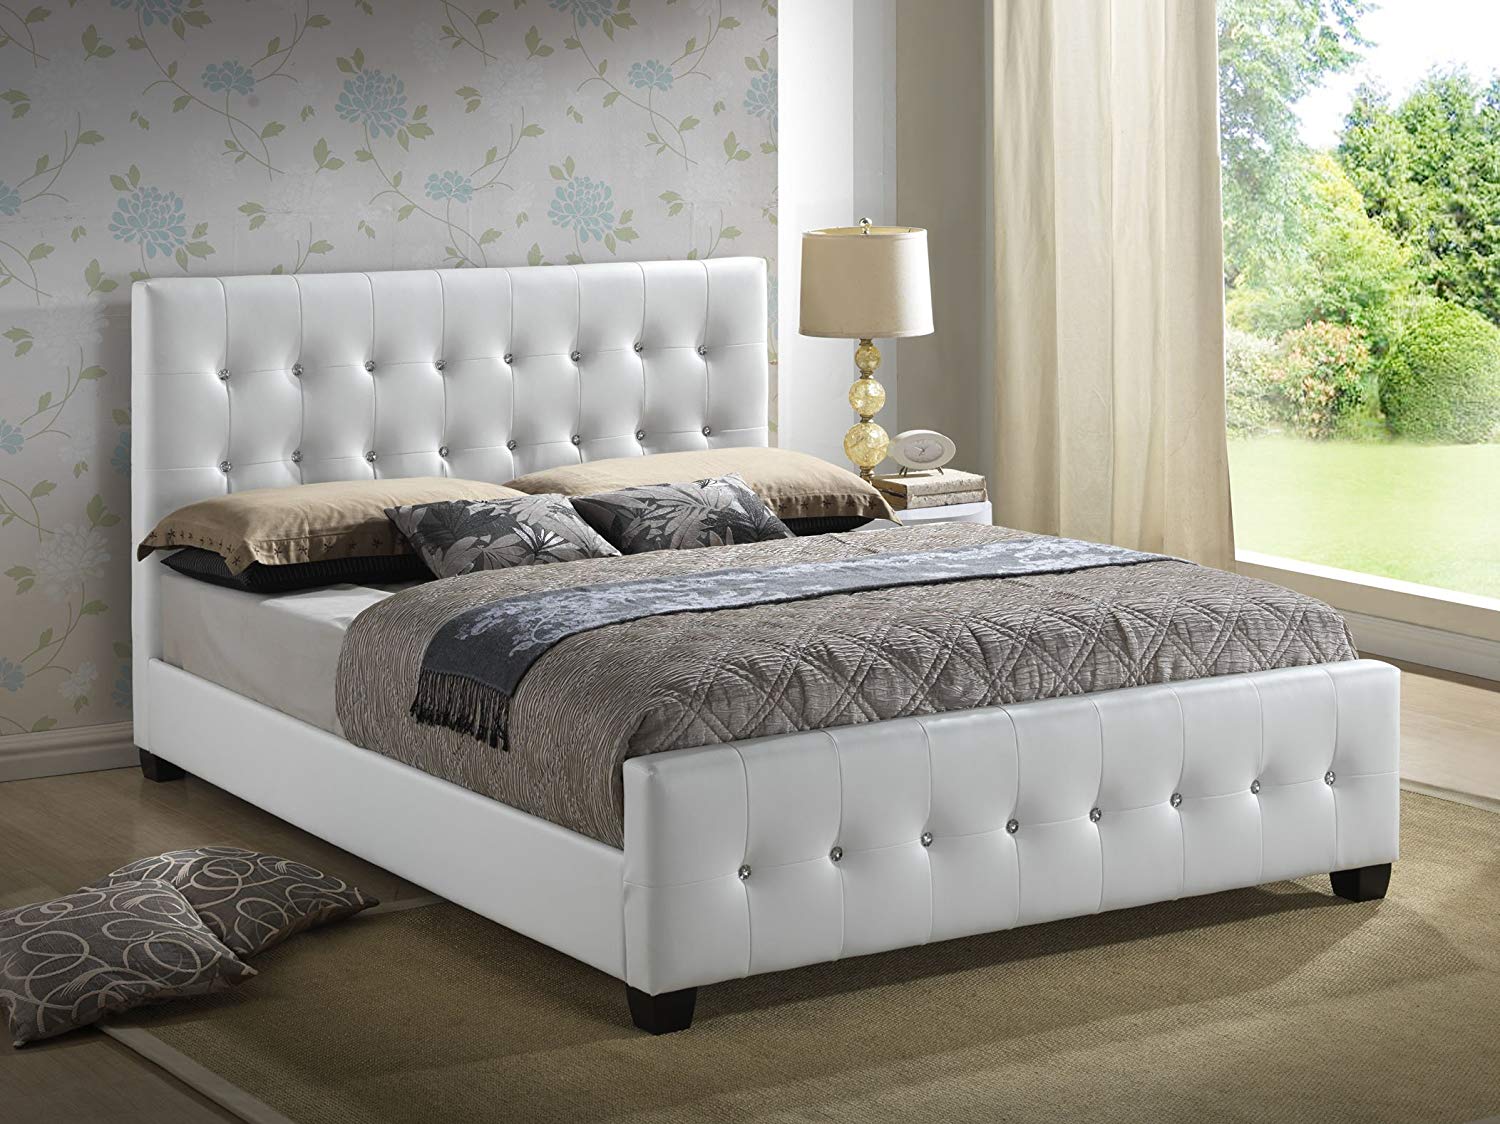 queen size beds amazon.com: white - queen size - modern headboard tufted leather look PXROMOT